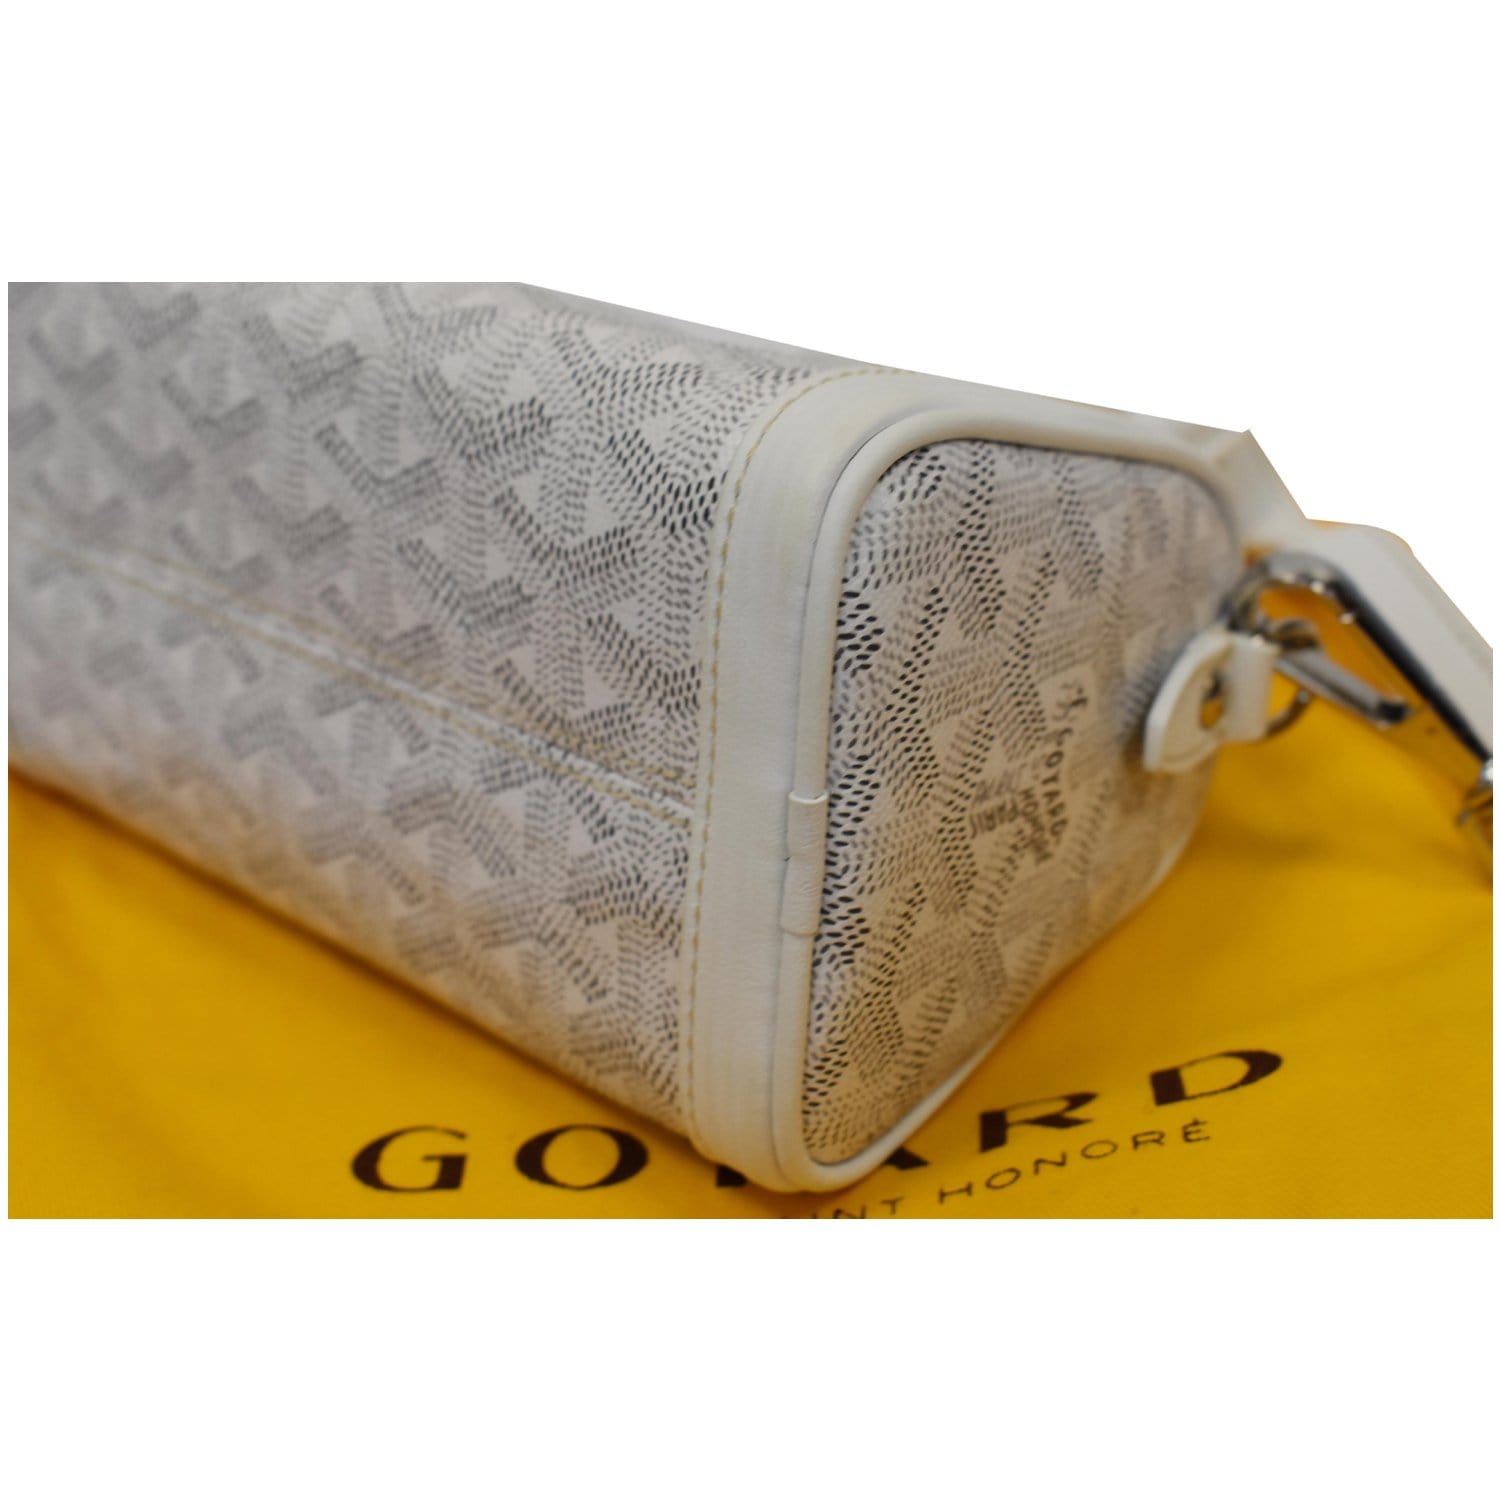 Goyard Limited Edition Pink Coated Canvas Croisiere 35 Bag - Yoogi's Closet